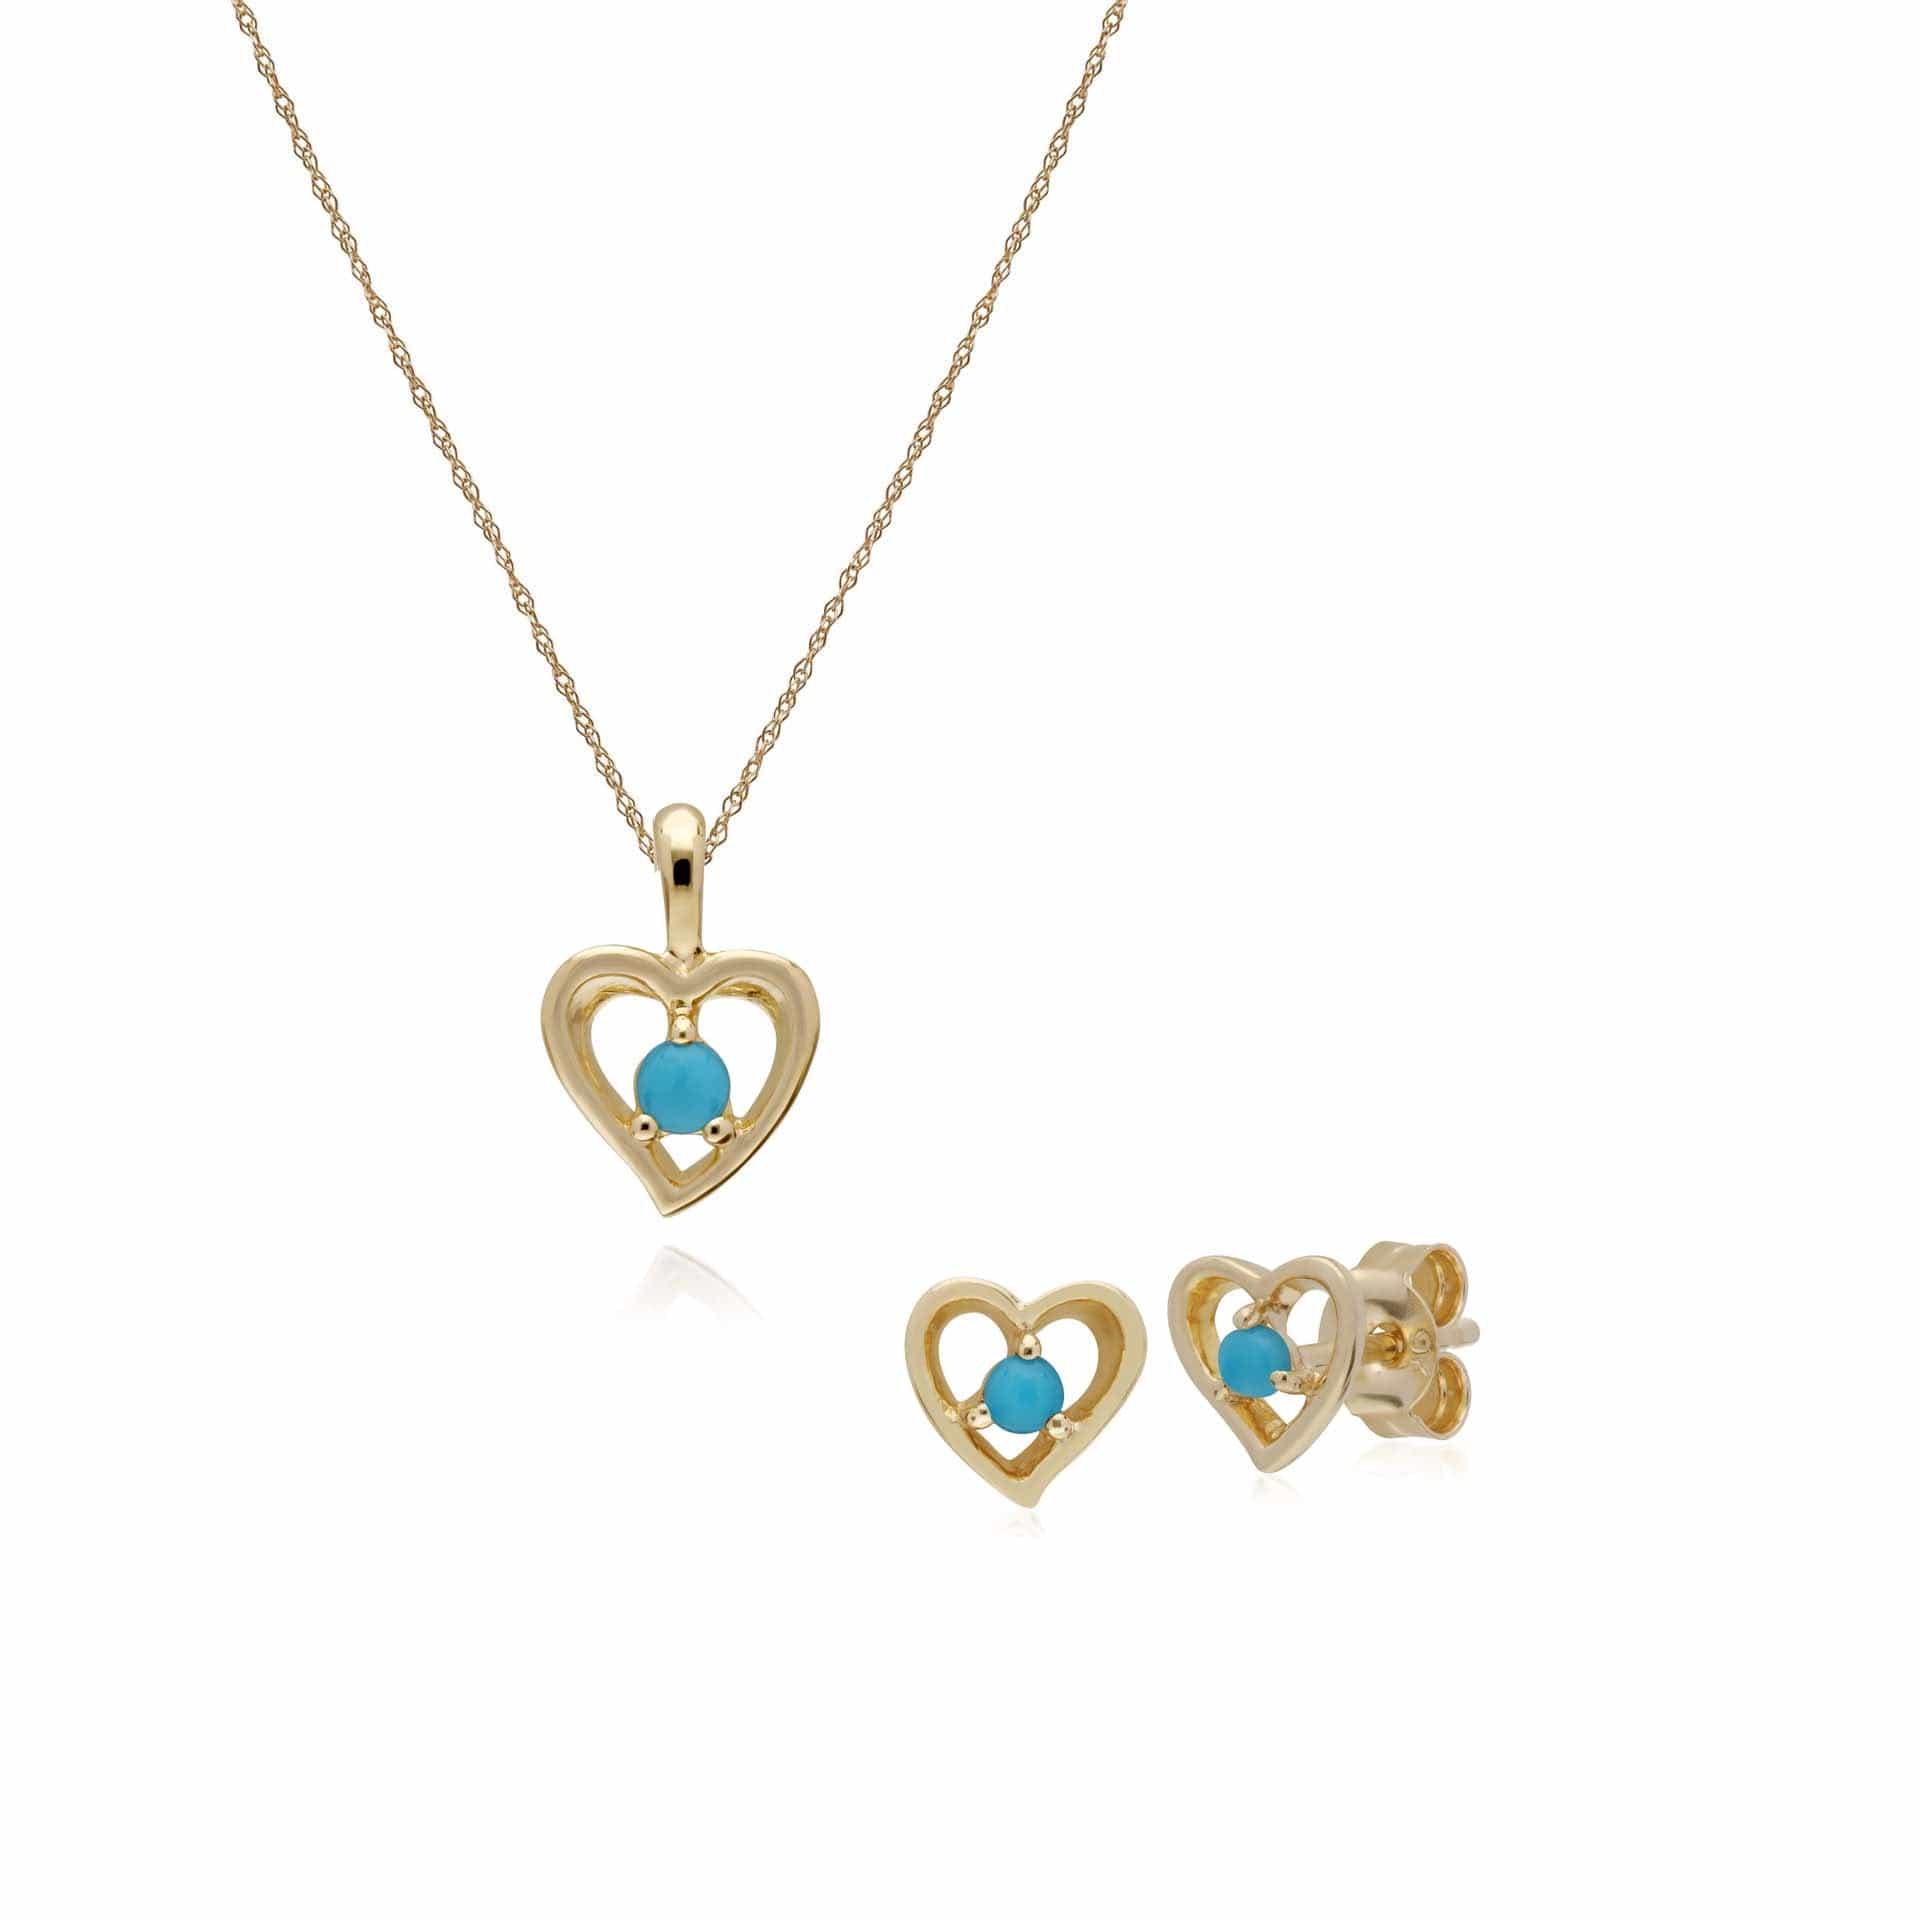 135E1564019-135P1902019 Classic Round Turquoise Single Stone Heart Stud Earrings & Necklace Set in 9ct Yellow Gold 1